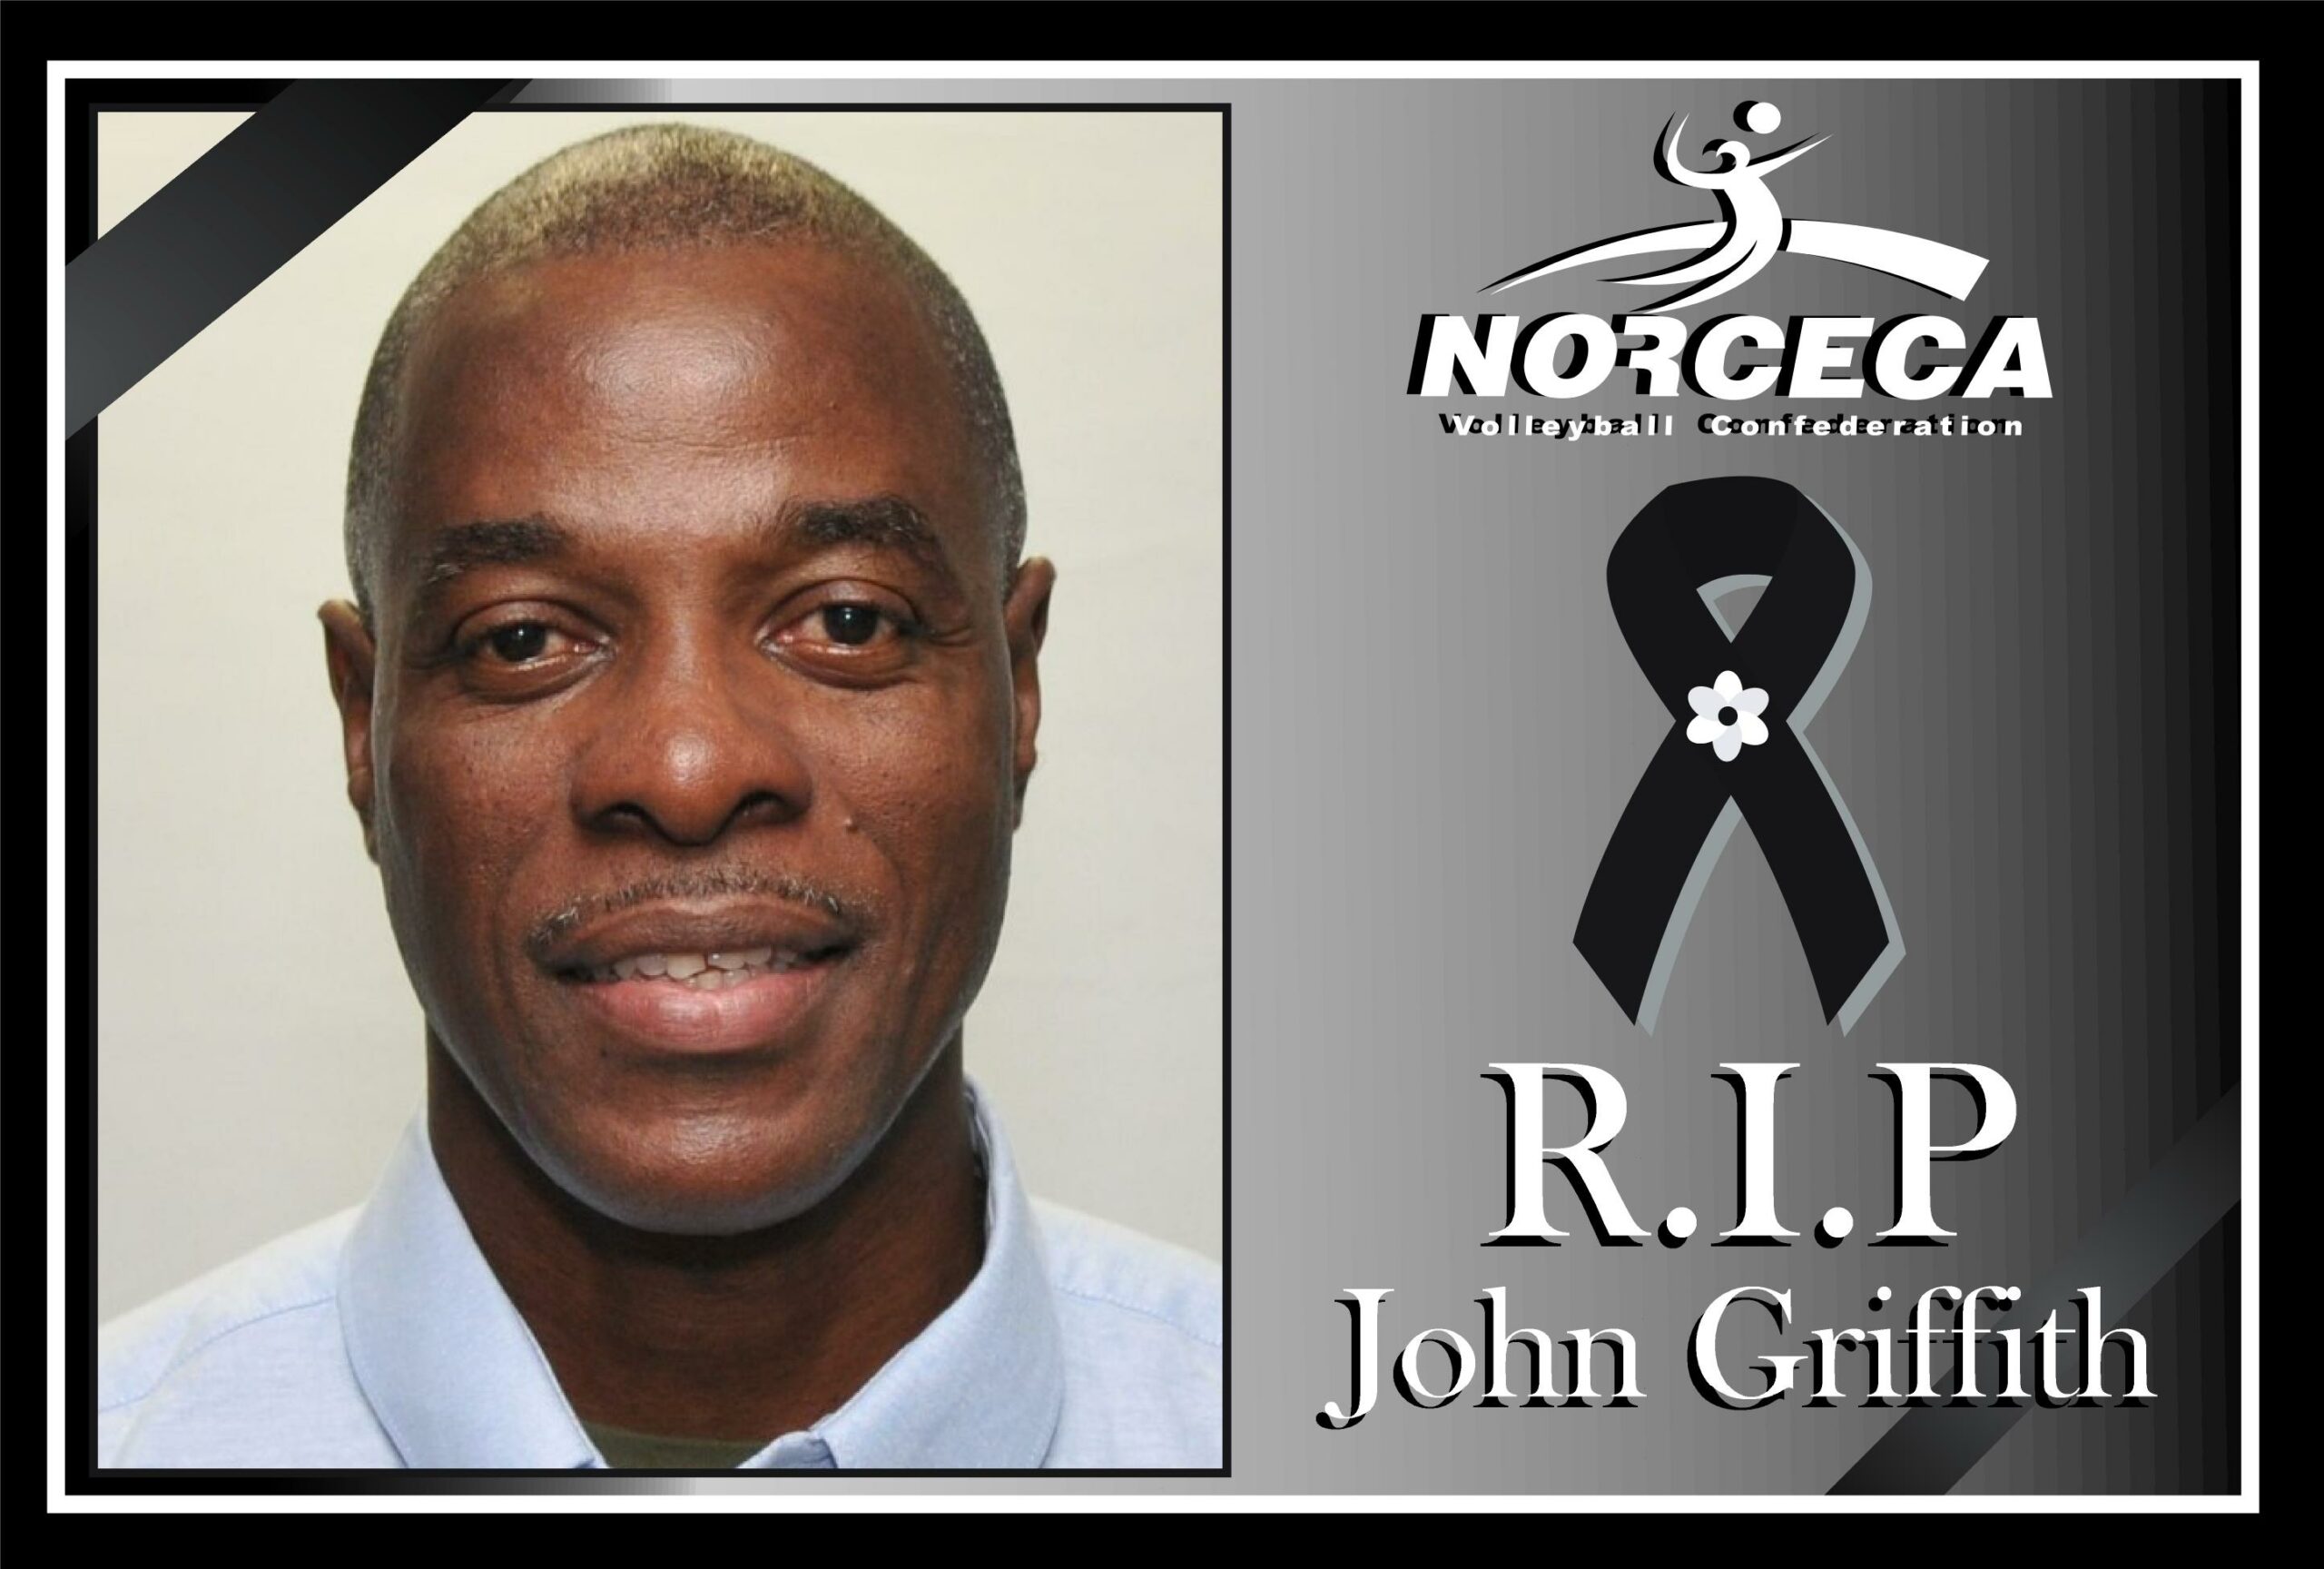 NORCECA mourns the passing of John Griffith